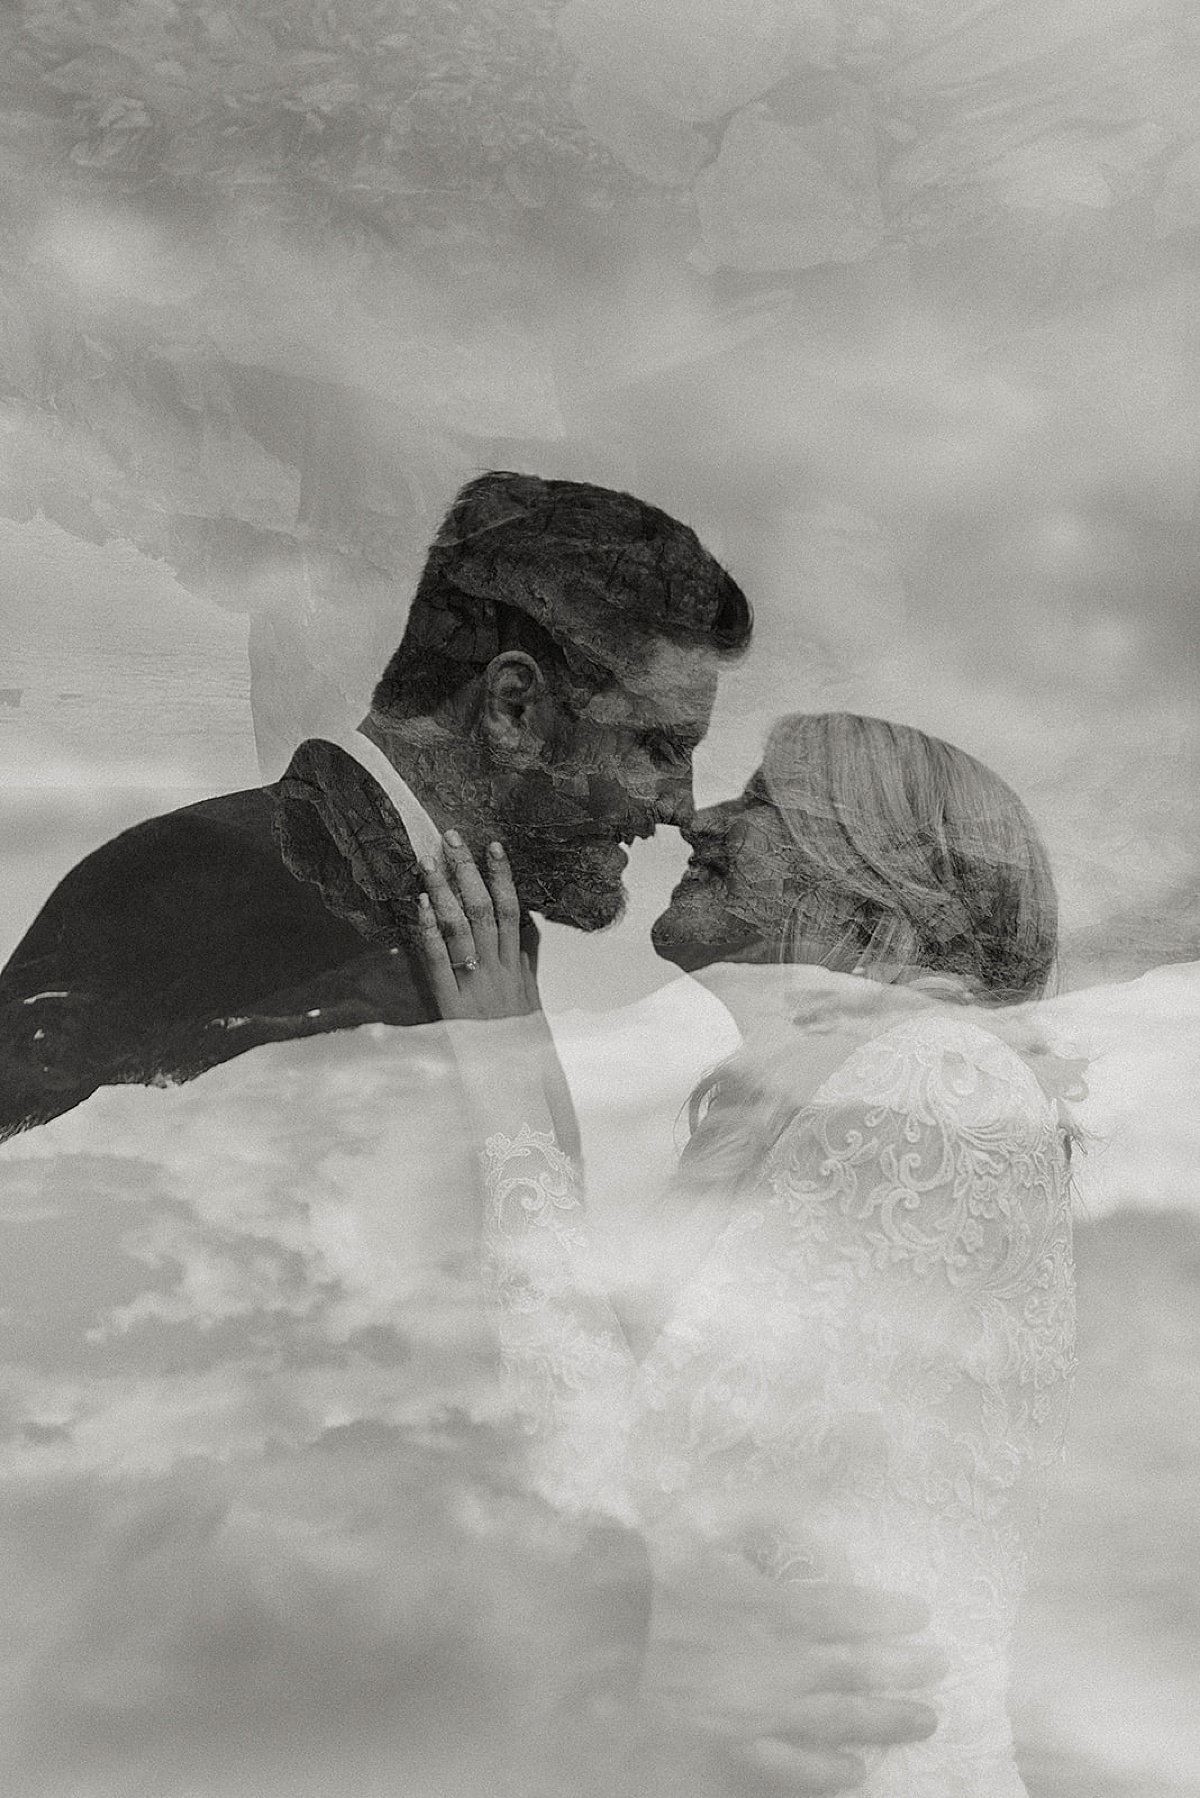  image of bride and groom is superimposed over mountain landscape in artsy shoot after moody glacier creek wedding 